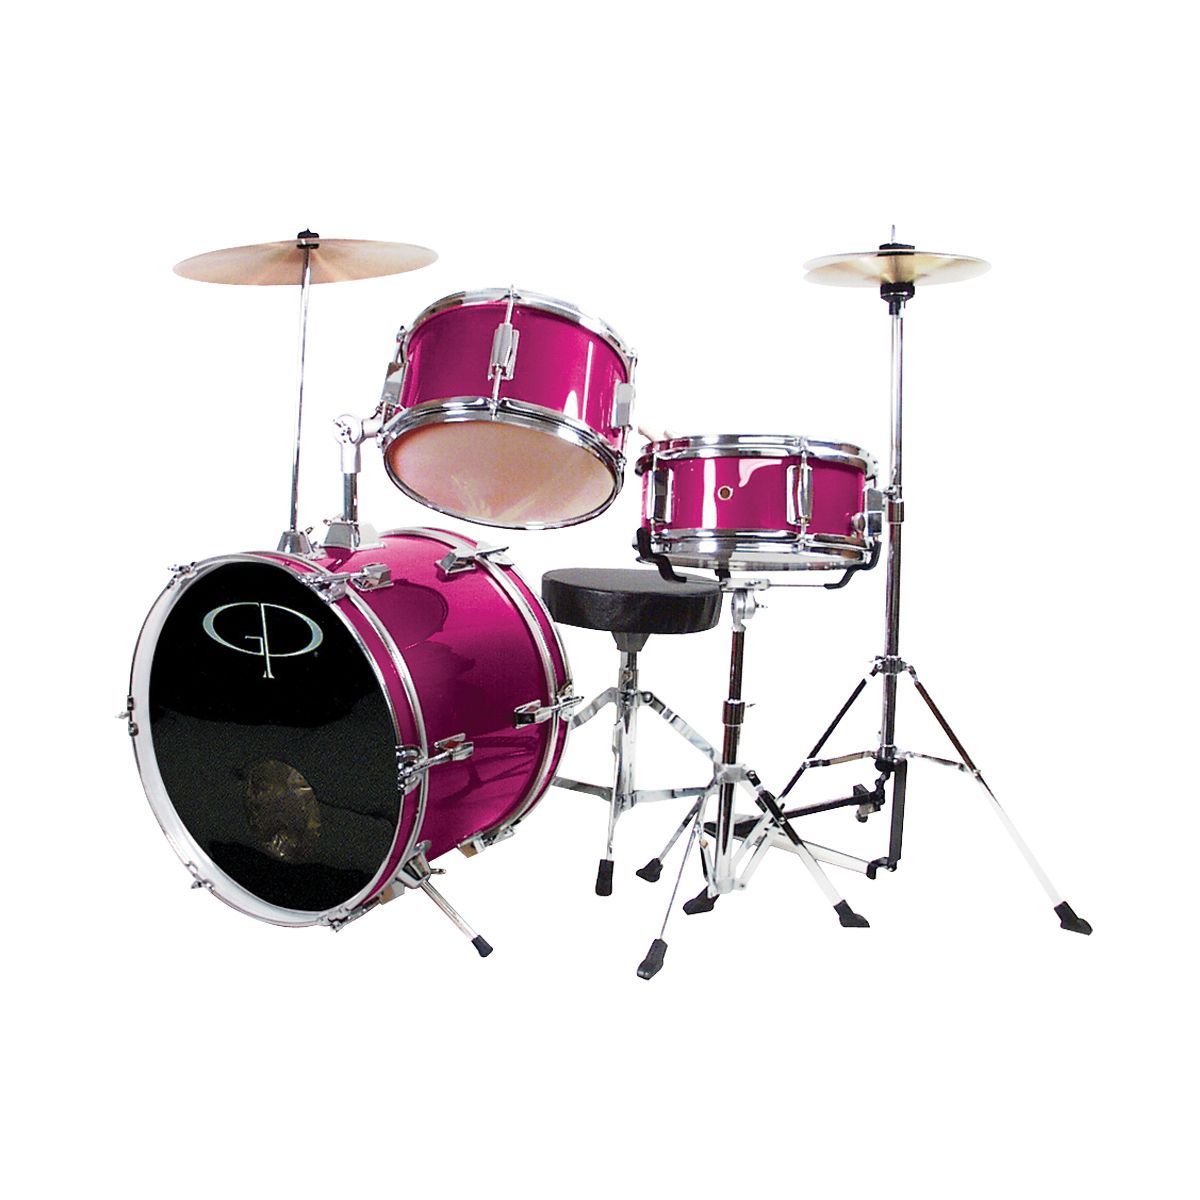 GP50 3-Piece Junior Drum Set With Cymbals and Throne in Metallic Pink